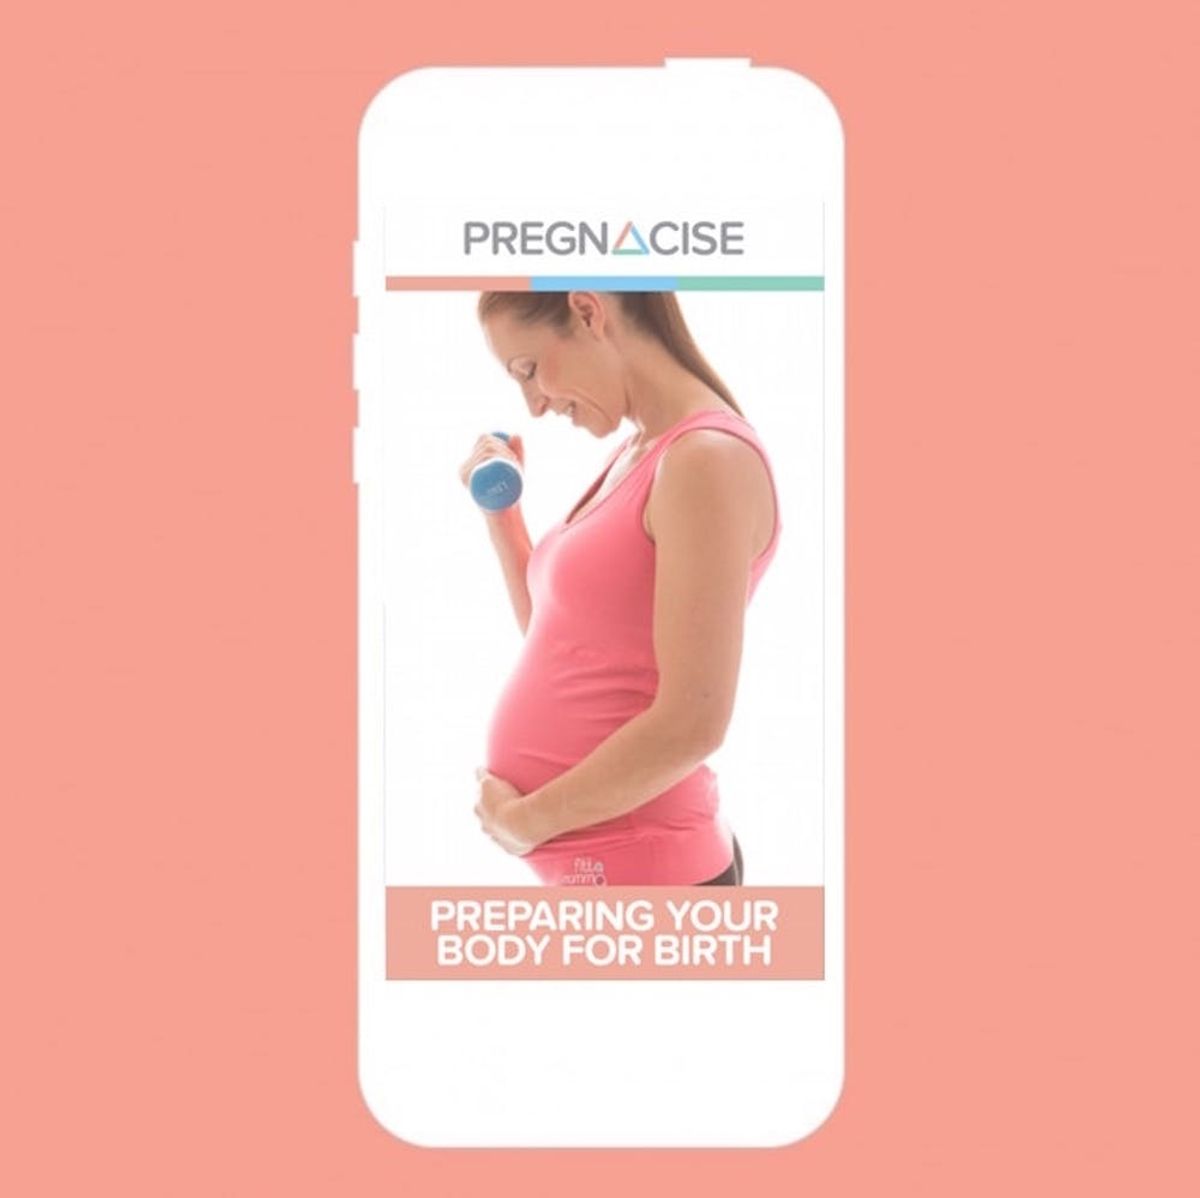 This App Creates a Fitness Plan Just for Pregnant Women